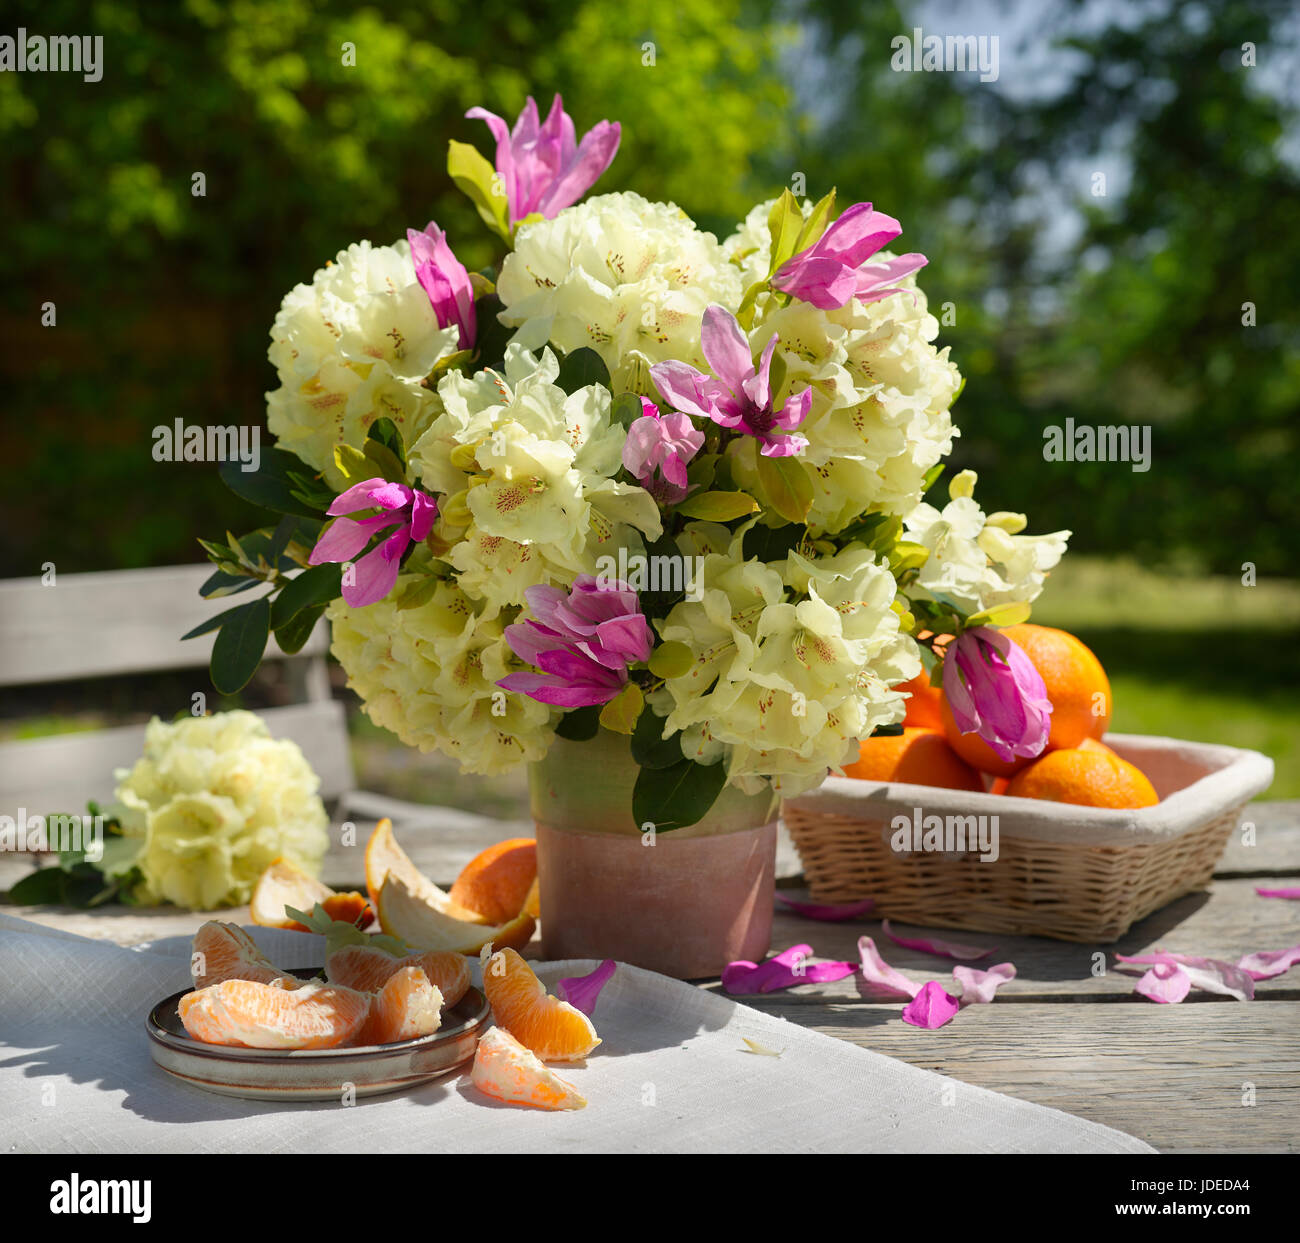 Bouquet of flowers with azaleas and magnolia. Stock Photo